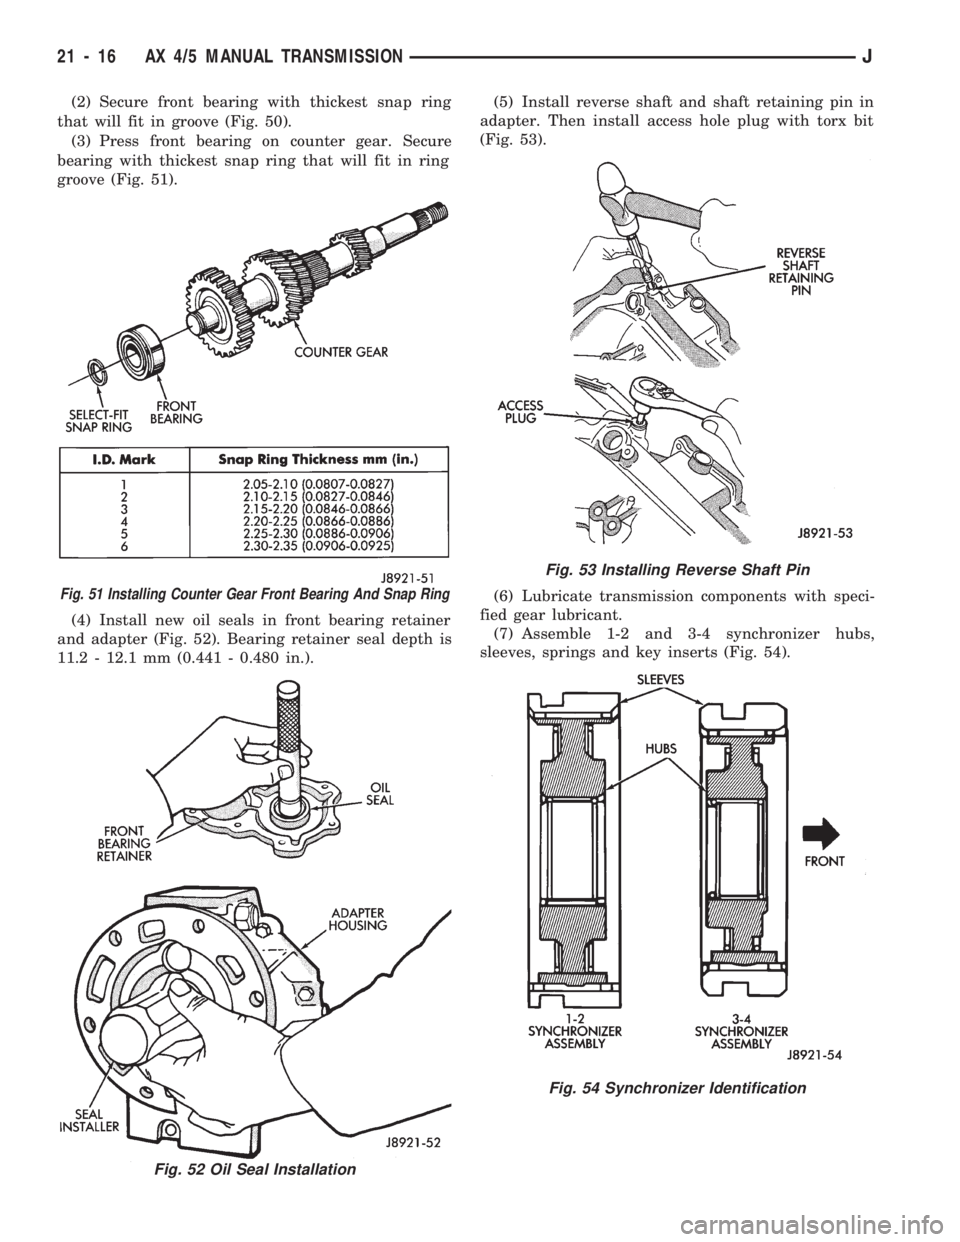 JEEP WRANGLER 1994  Owners Manual Fig. 52 Oil Seal Installation
Fig. 53 Installing Reverse Shaft Pin
Fig. 54 Synchronizer Identification
21 - 16 AX 4/5 MANUAL TRANSMISSIONJ 